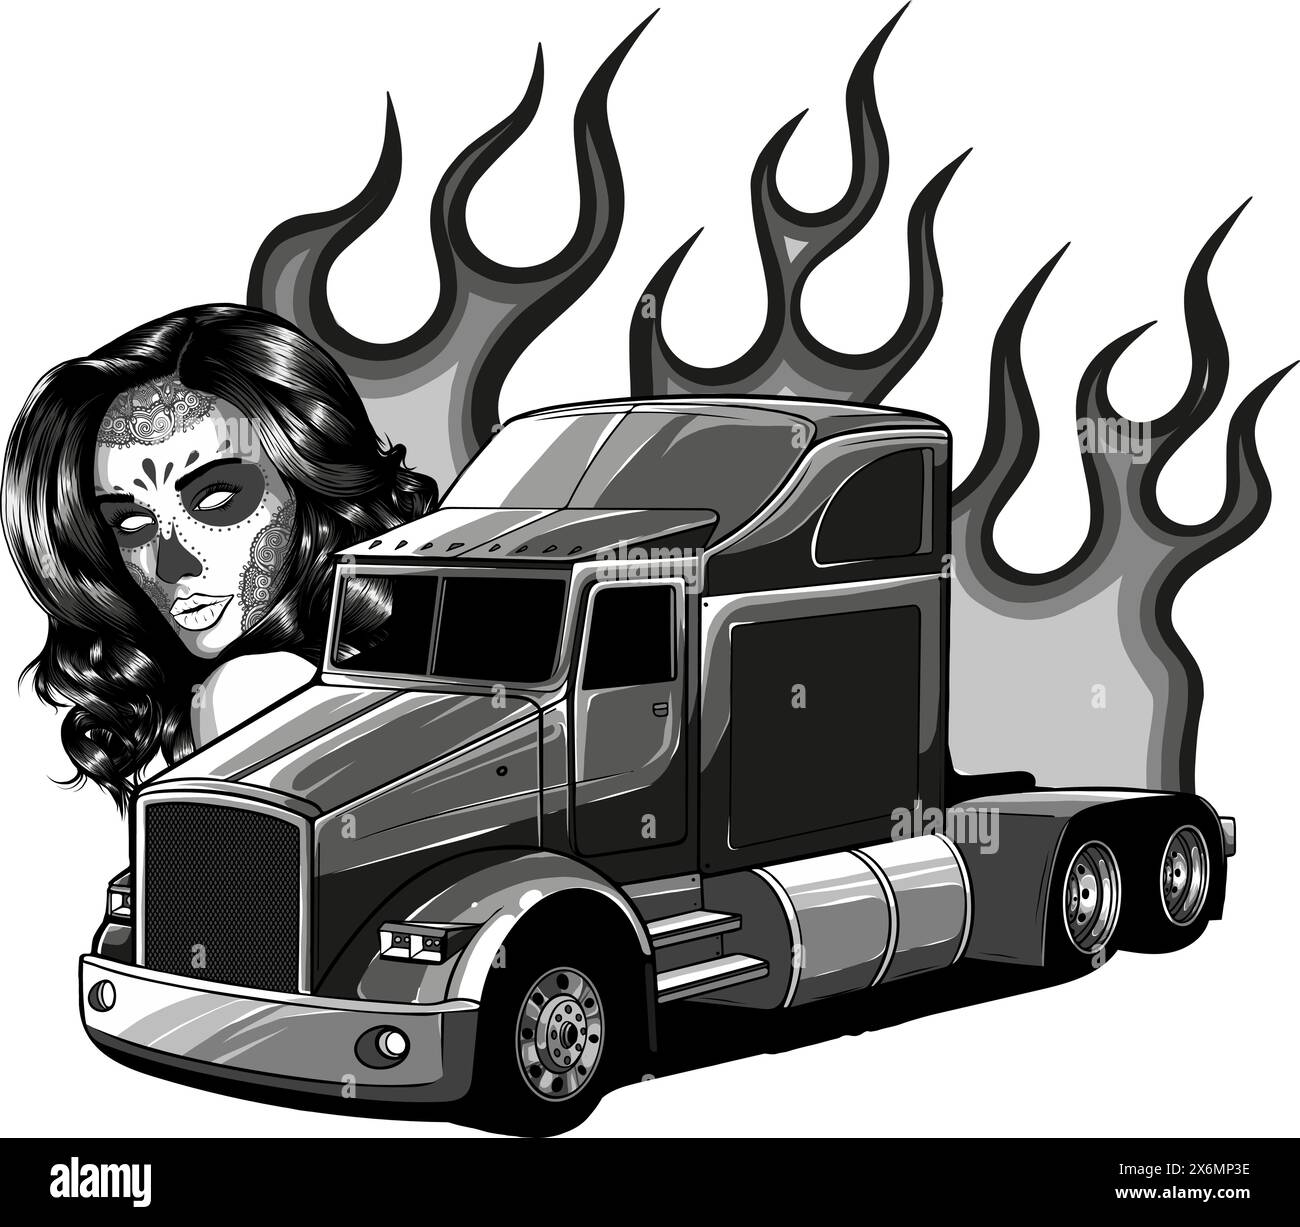 Monochrome semi truck with woman face and flames vector illustration on white background Stock Vector